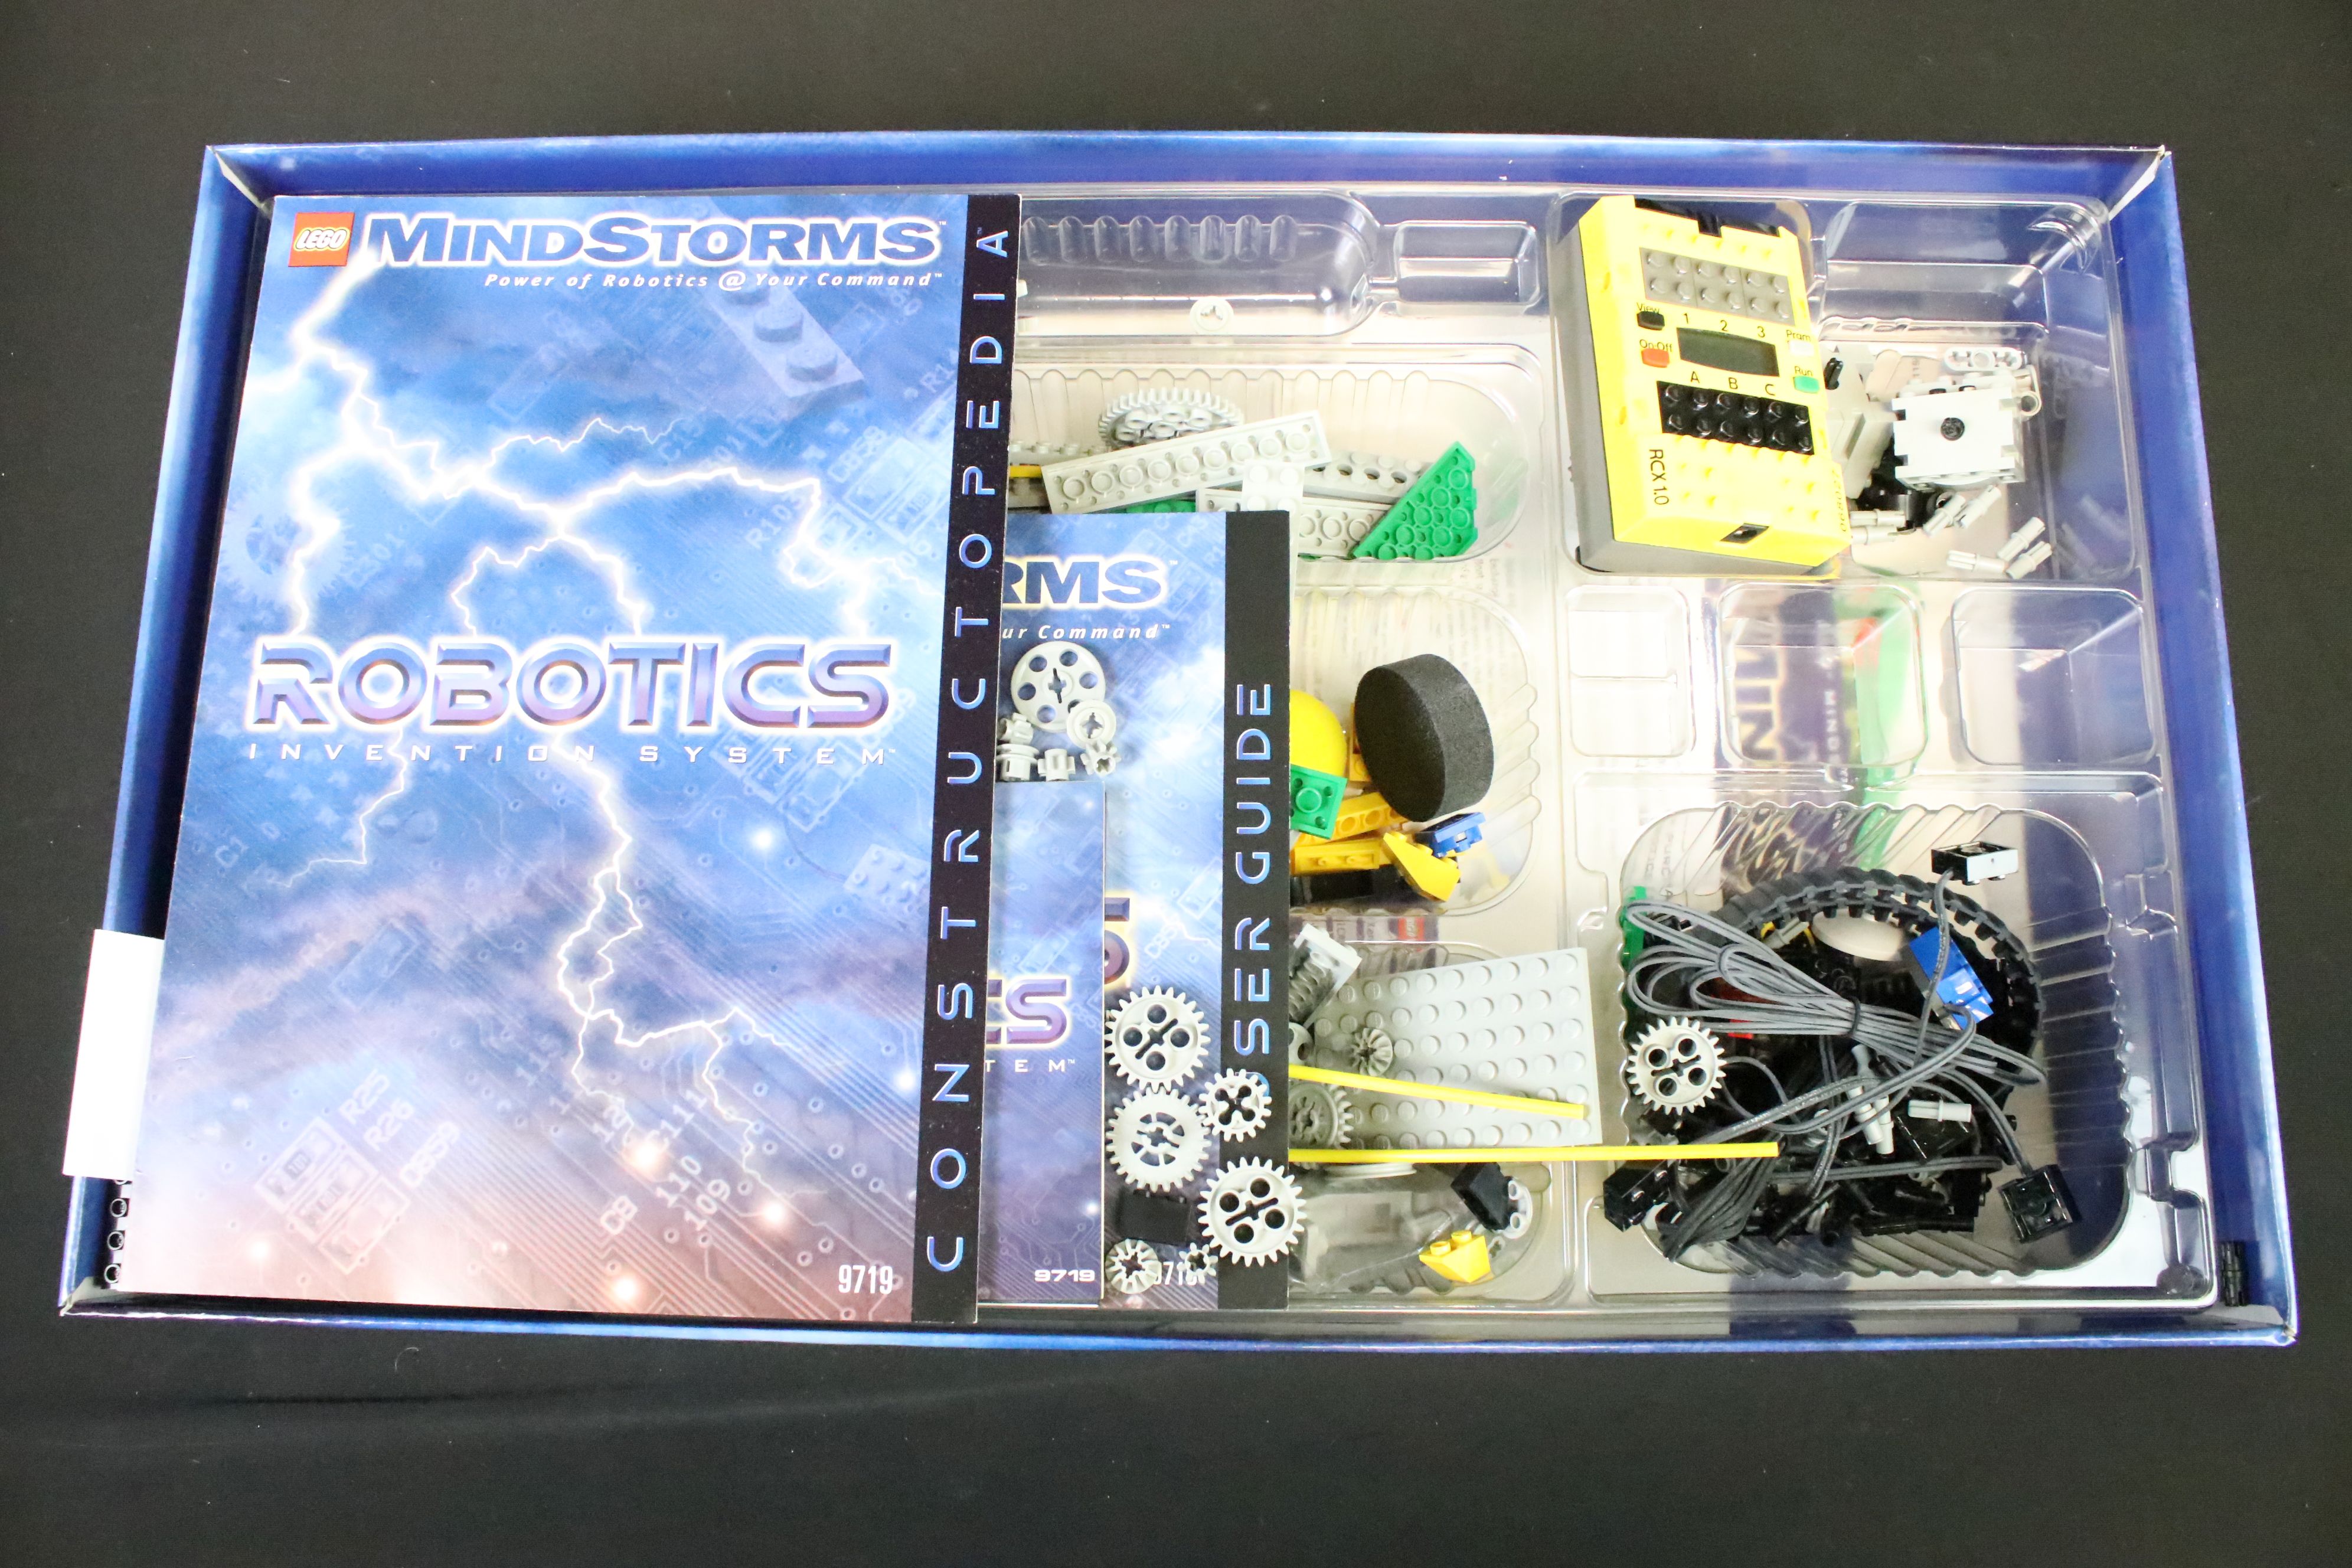 Collection of mixed toys and games to include Lego Mindstorms Robotic Inventions System and Lego - Image 14 of 16